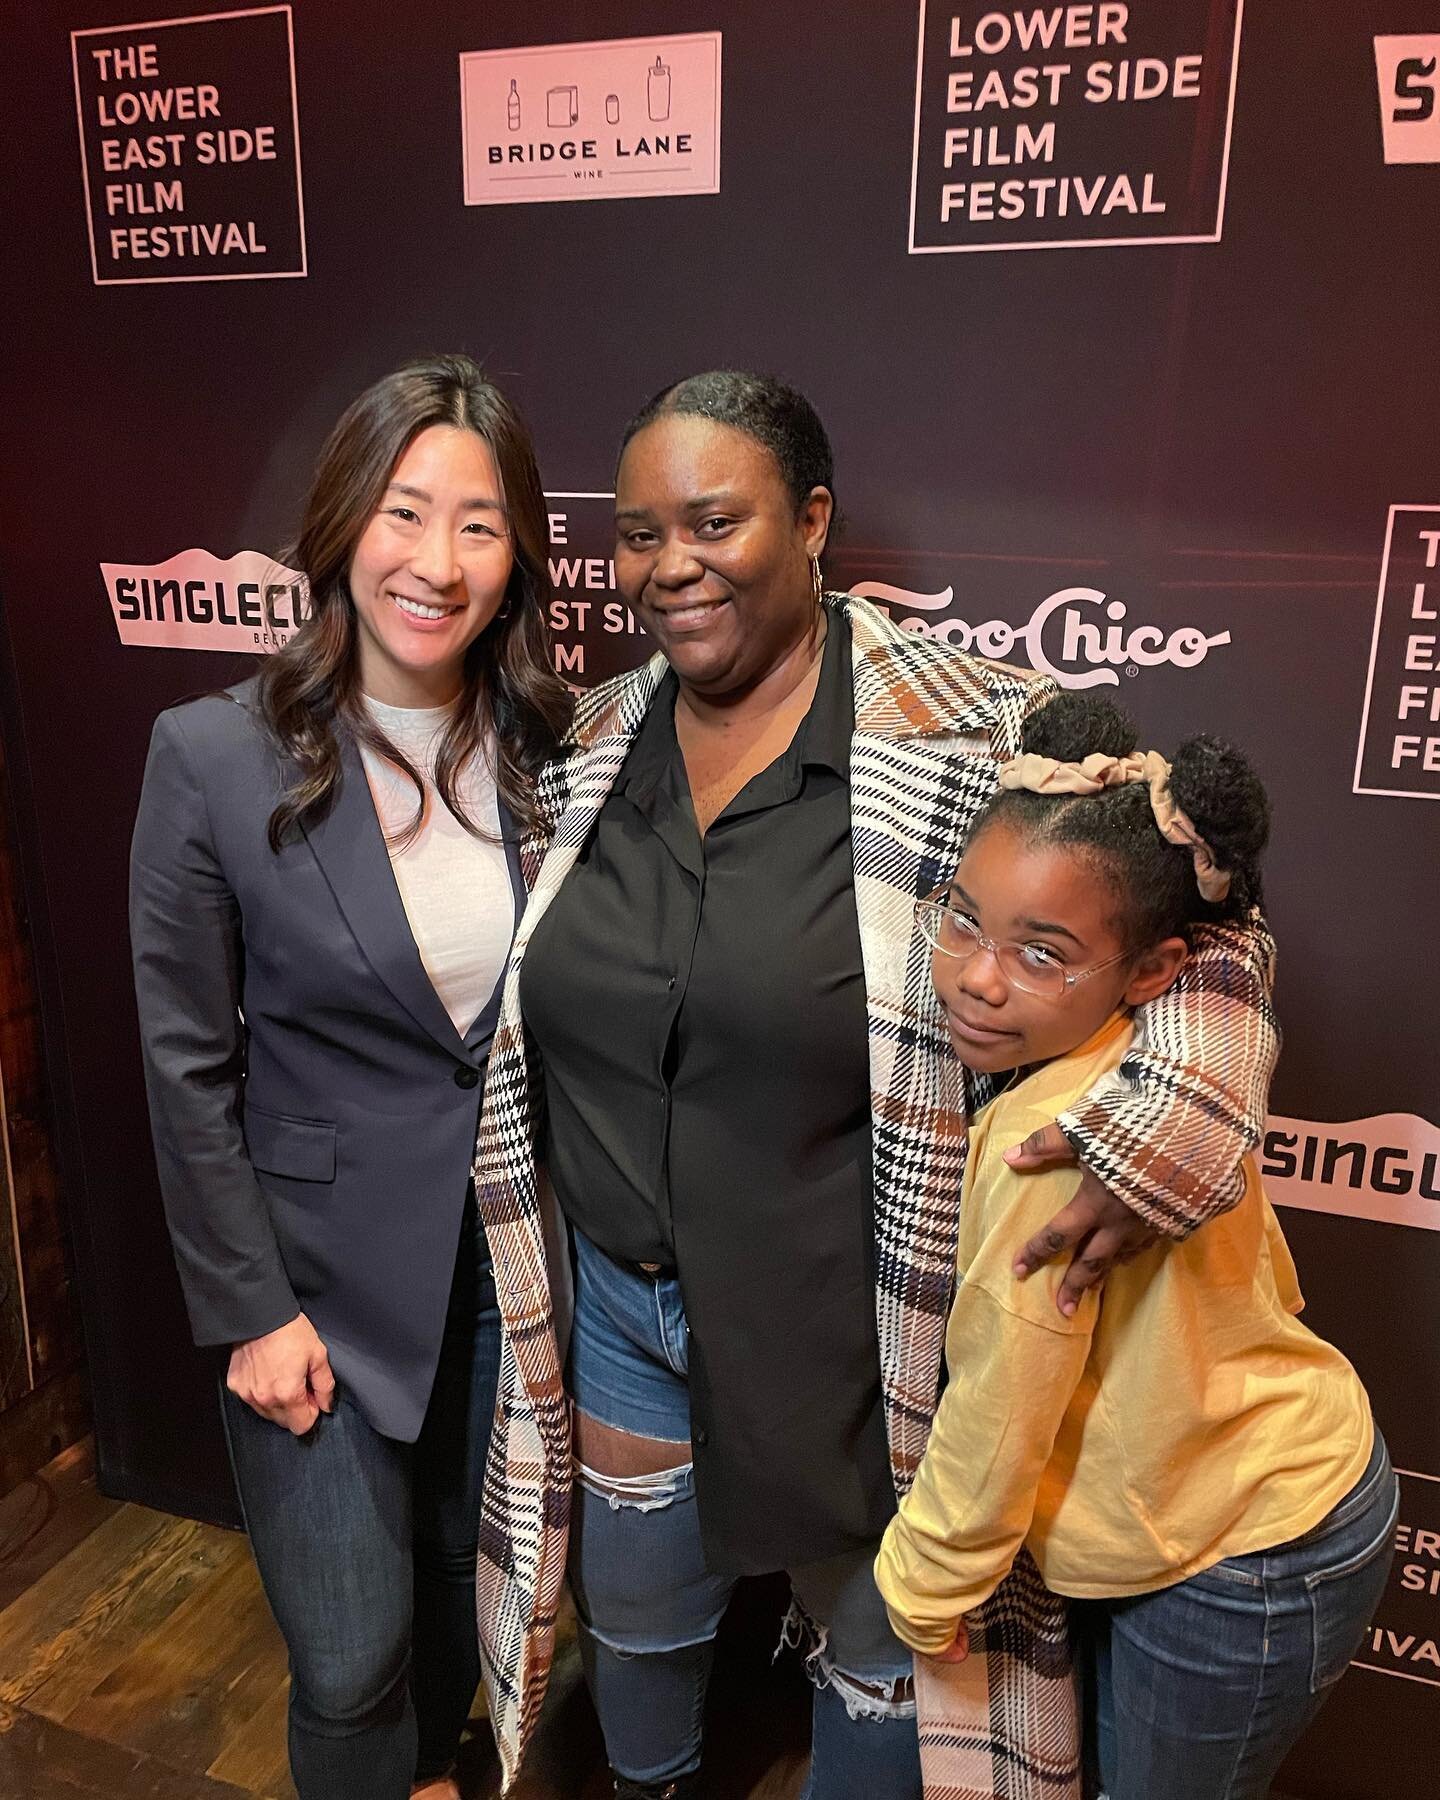 Congratulations to my dear friend Arnette Scott on her debut in the documentary film &ldquo;There Goes the Neighborhood&rdquo; repping the LES and calling out the displacement in our communities. Thank you for your voice and activism. @lesfilmfestiva